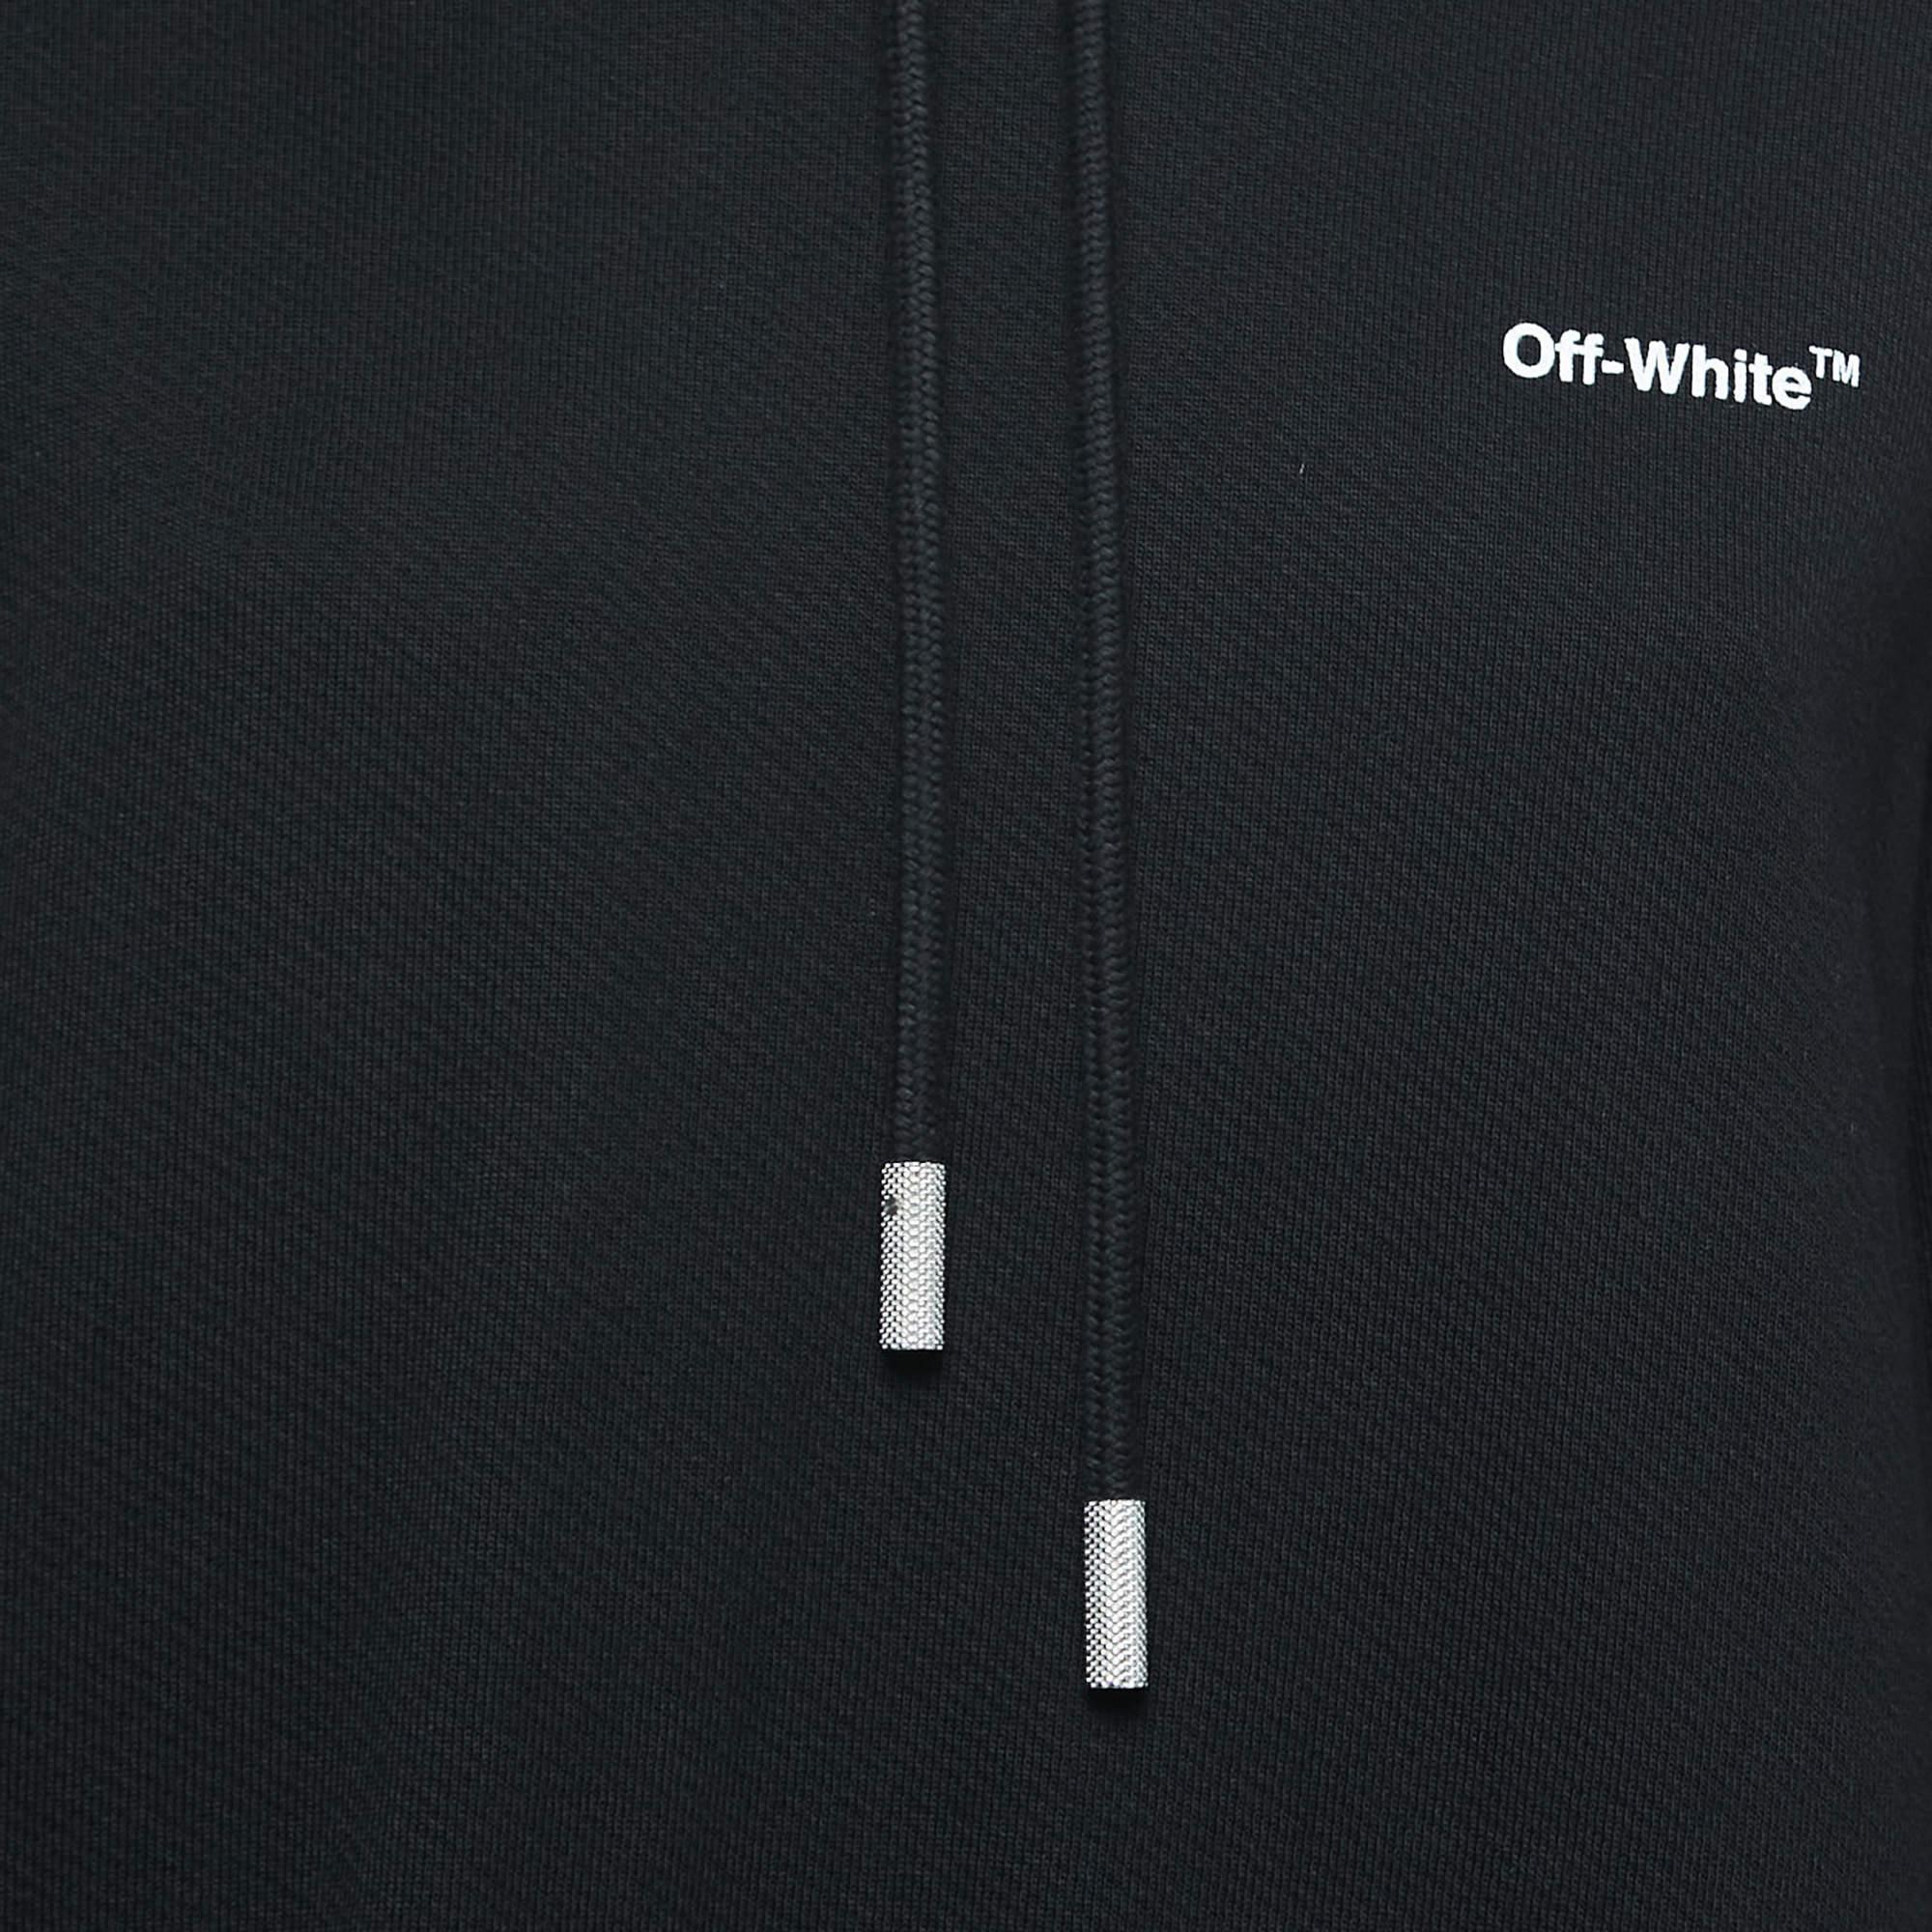 Women's Off-White Black Jersey Cotton Hoodie Dress S For Sale